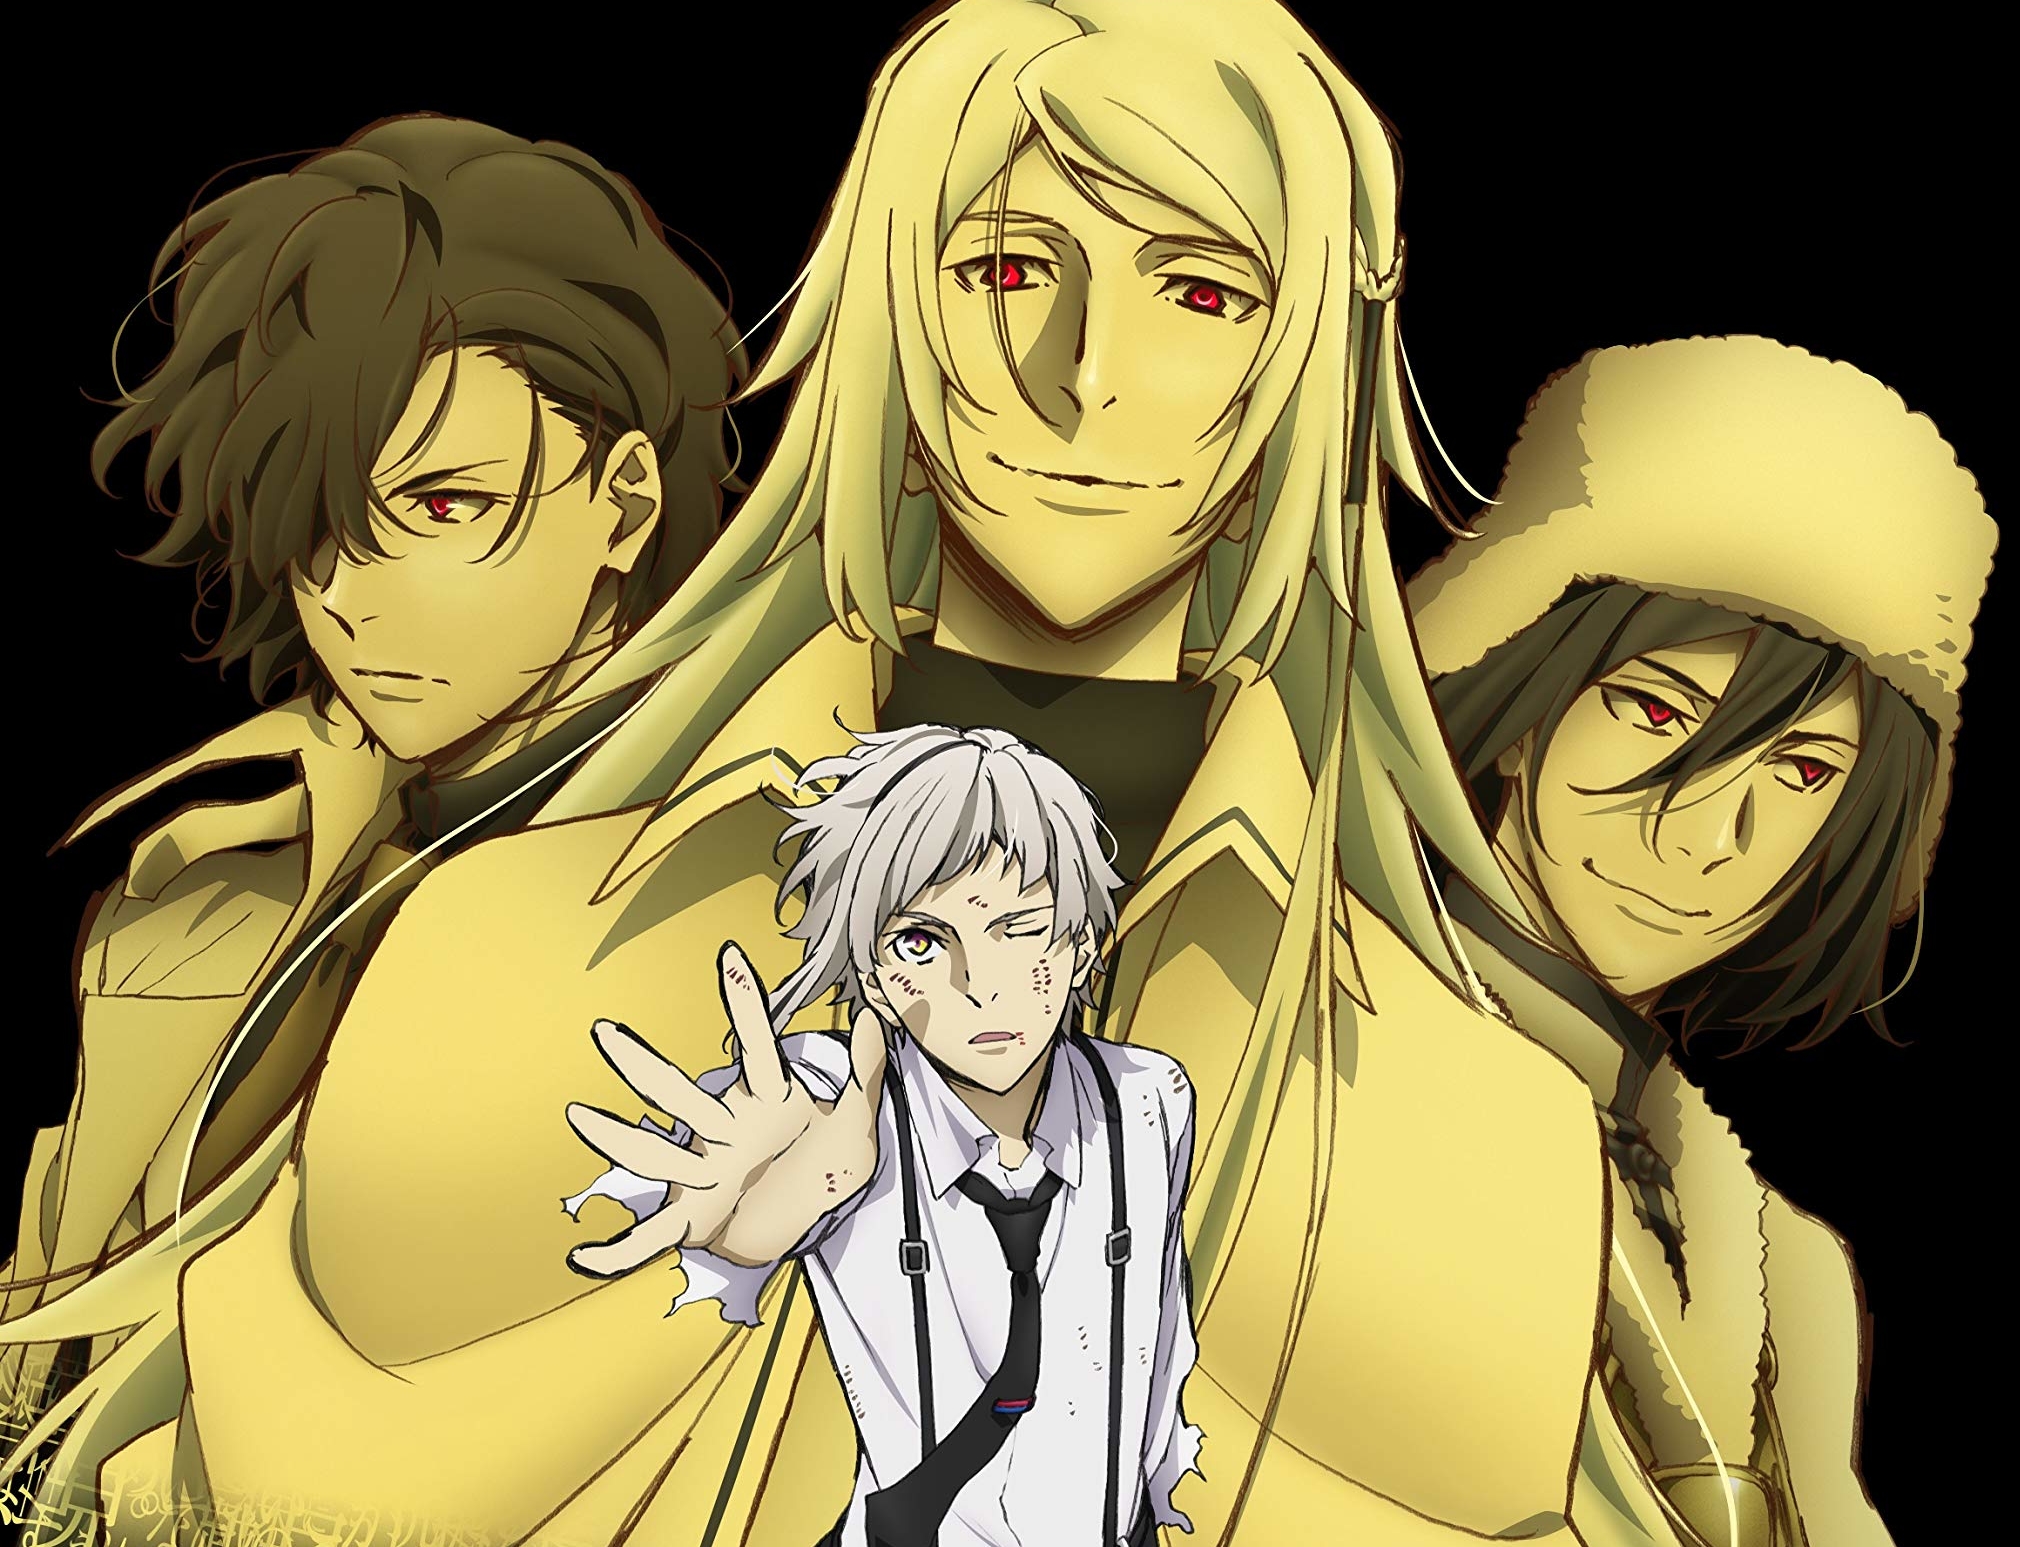 Anime Bungou Stray Dogs: Dead Apple HD Wallpaper | Background Image